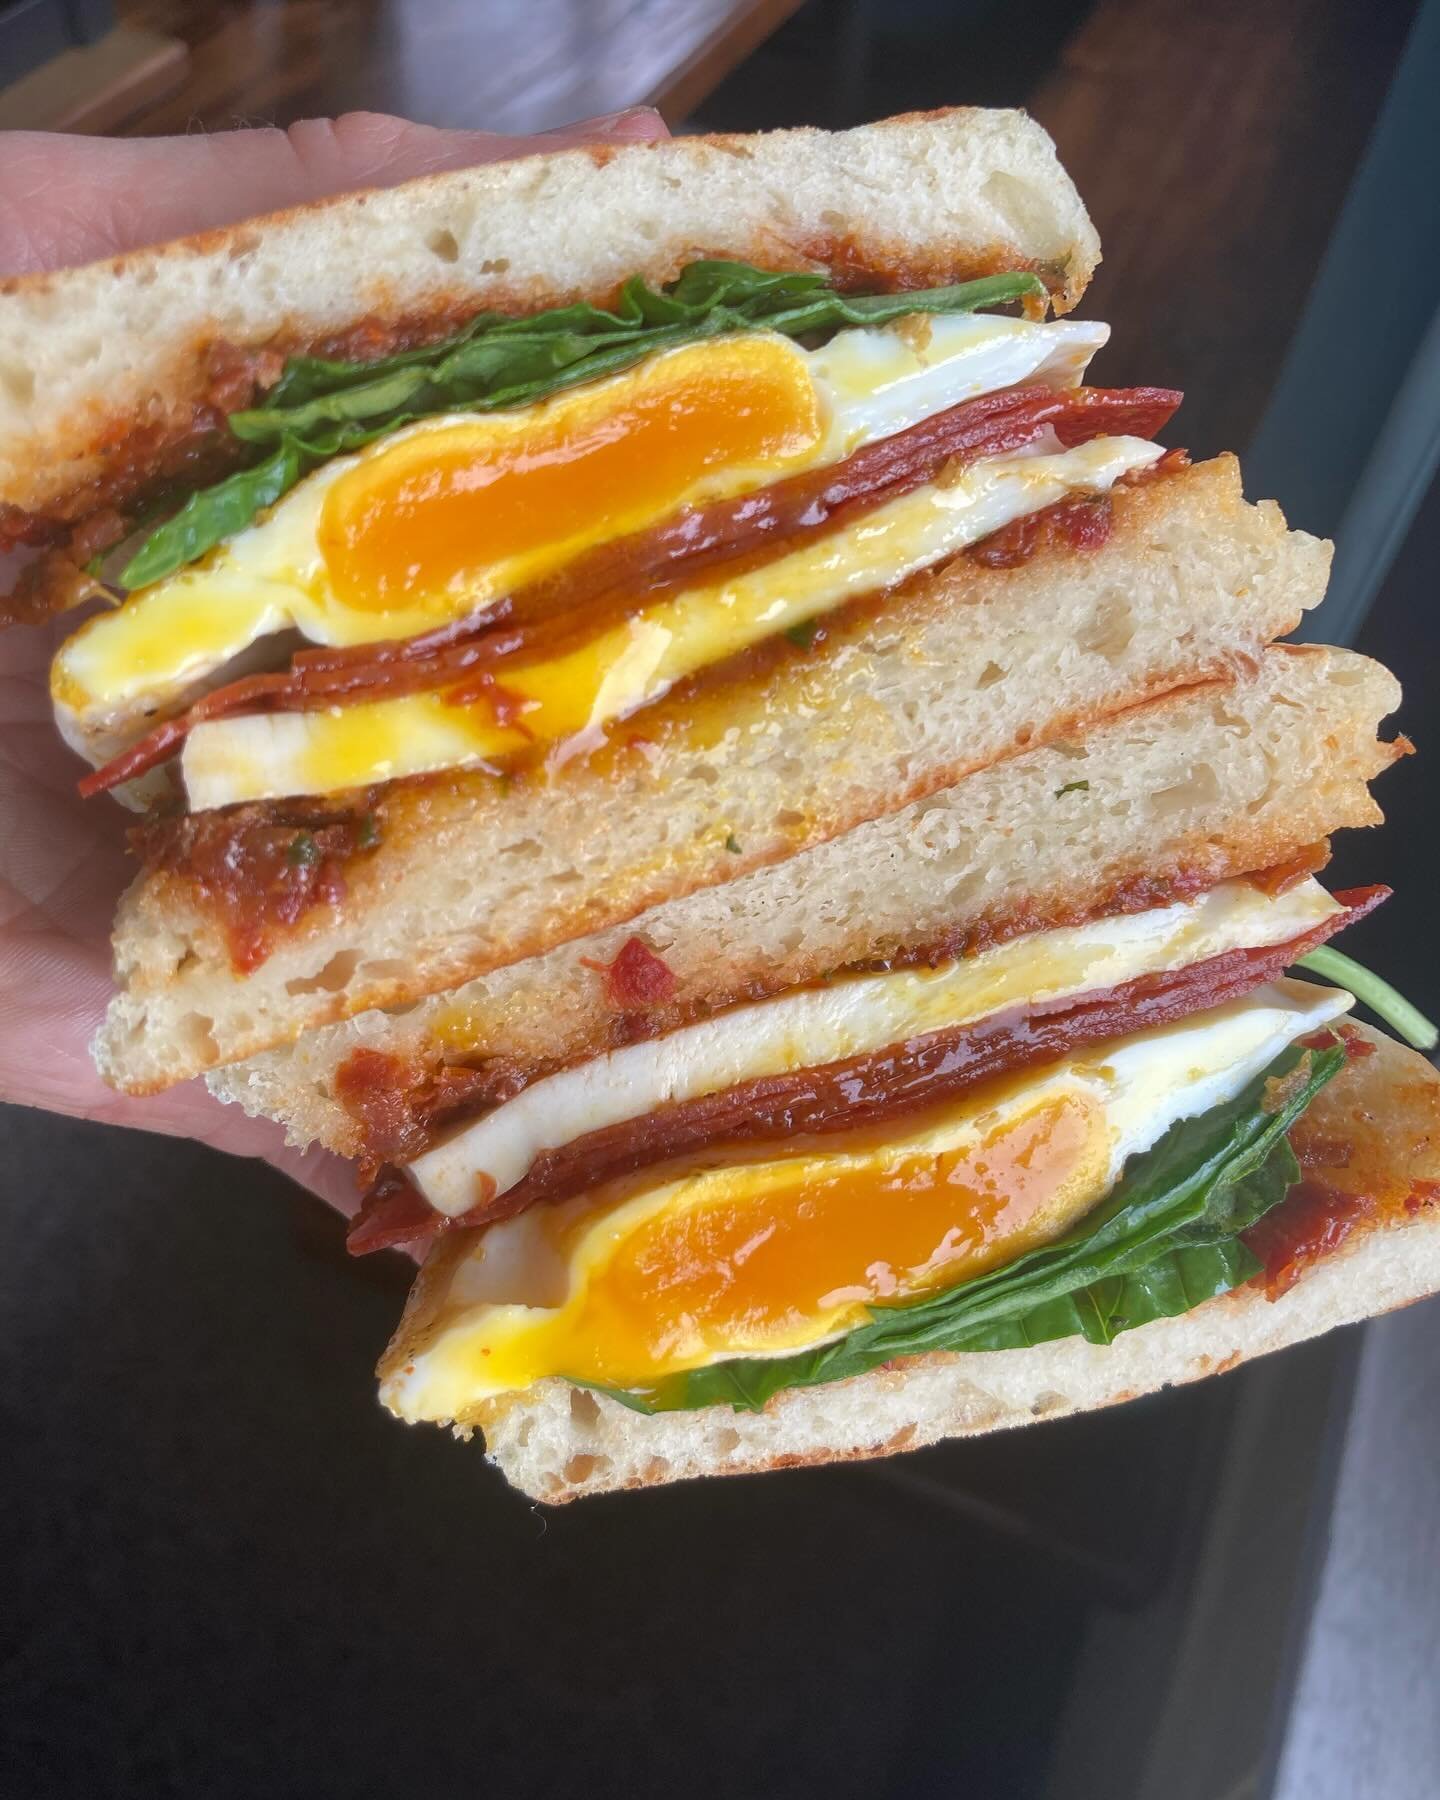 🍕 Special this week! 🍕
Fried egg, mozzarella, sun dried tomato pesto, pepperoni and spinach on a homemade garlic- parmesean english muffin 🍅 🧀 

#207 #maineeats #mainebreakfast